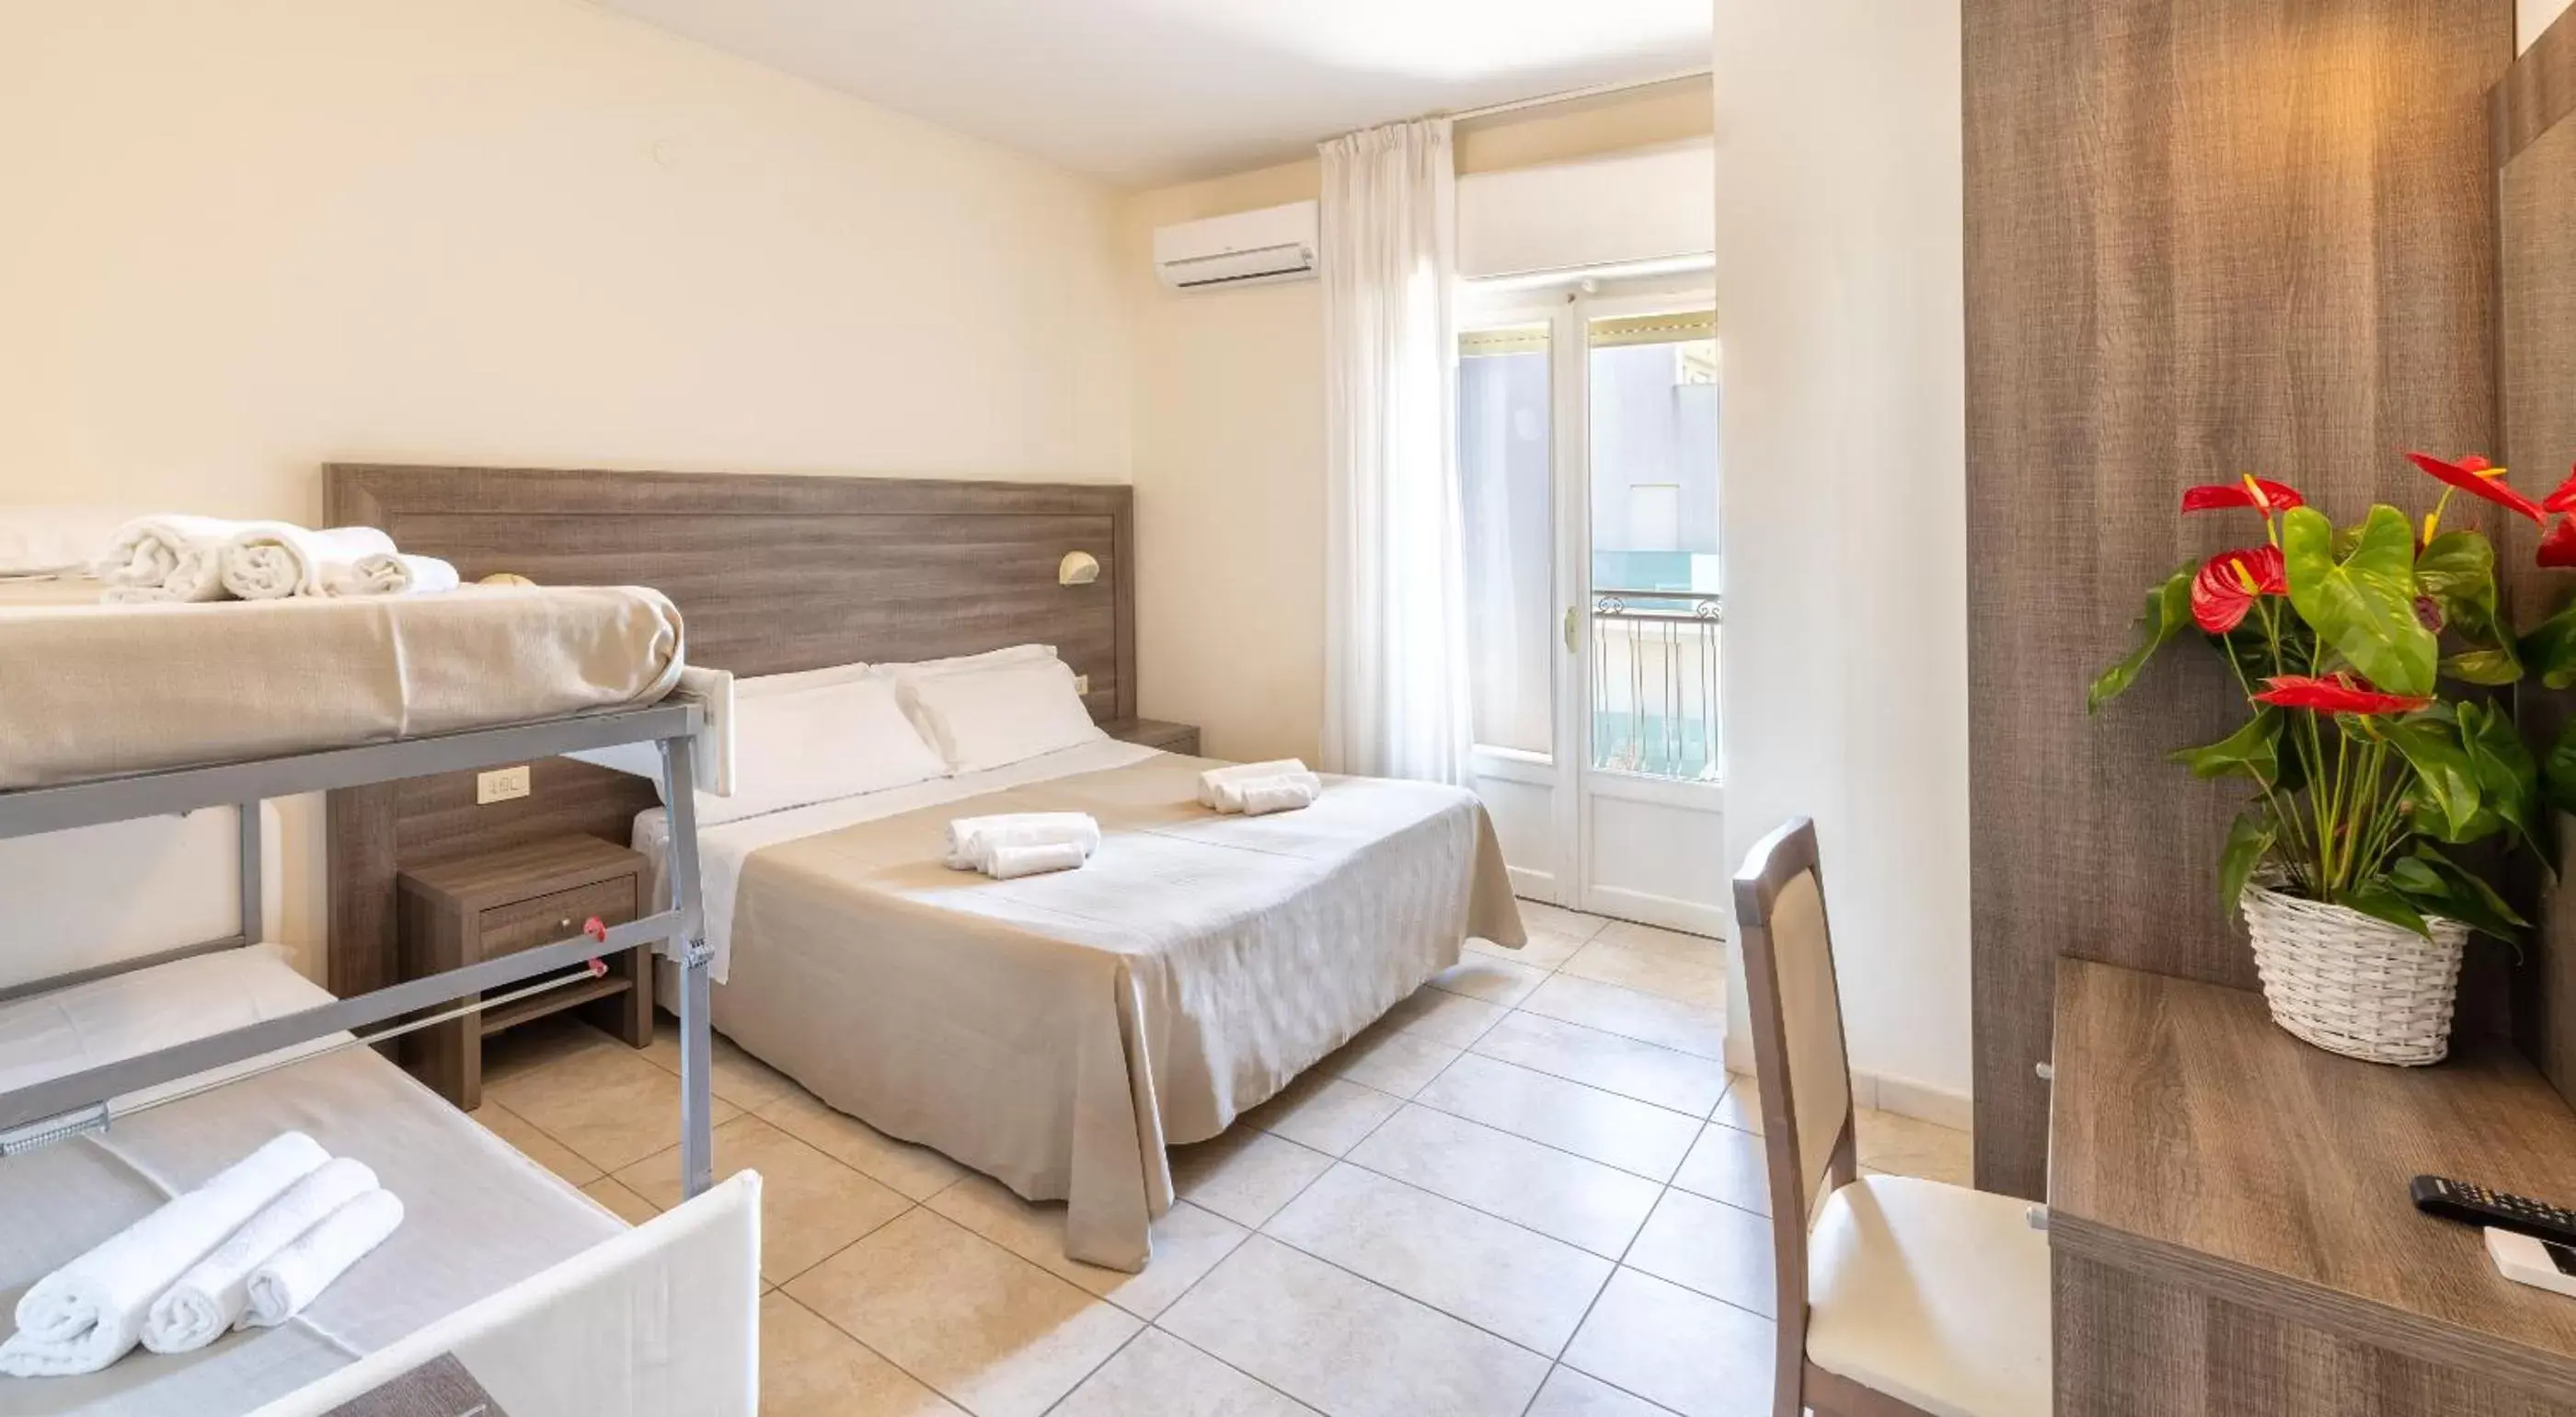 Bedroom in Hotel Edelweiss Riccione